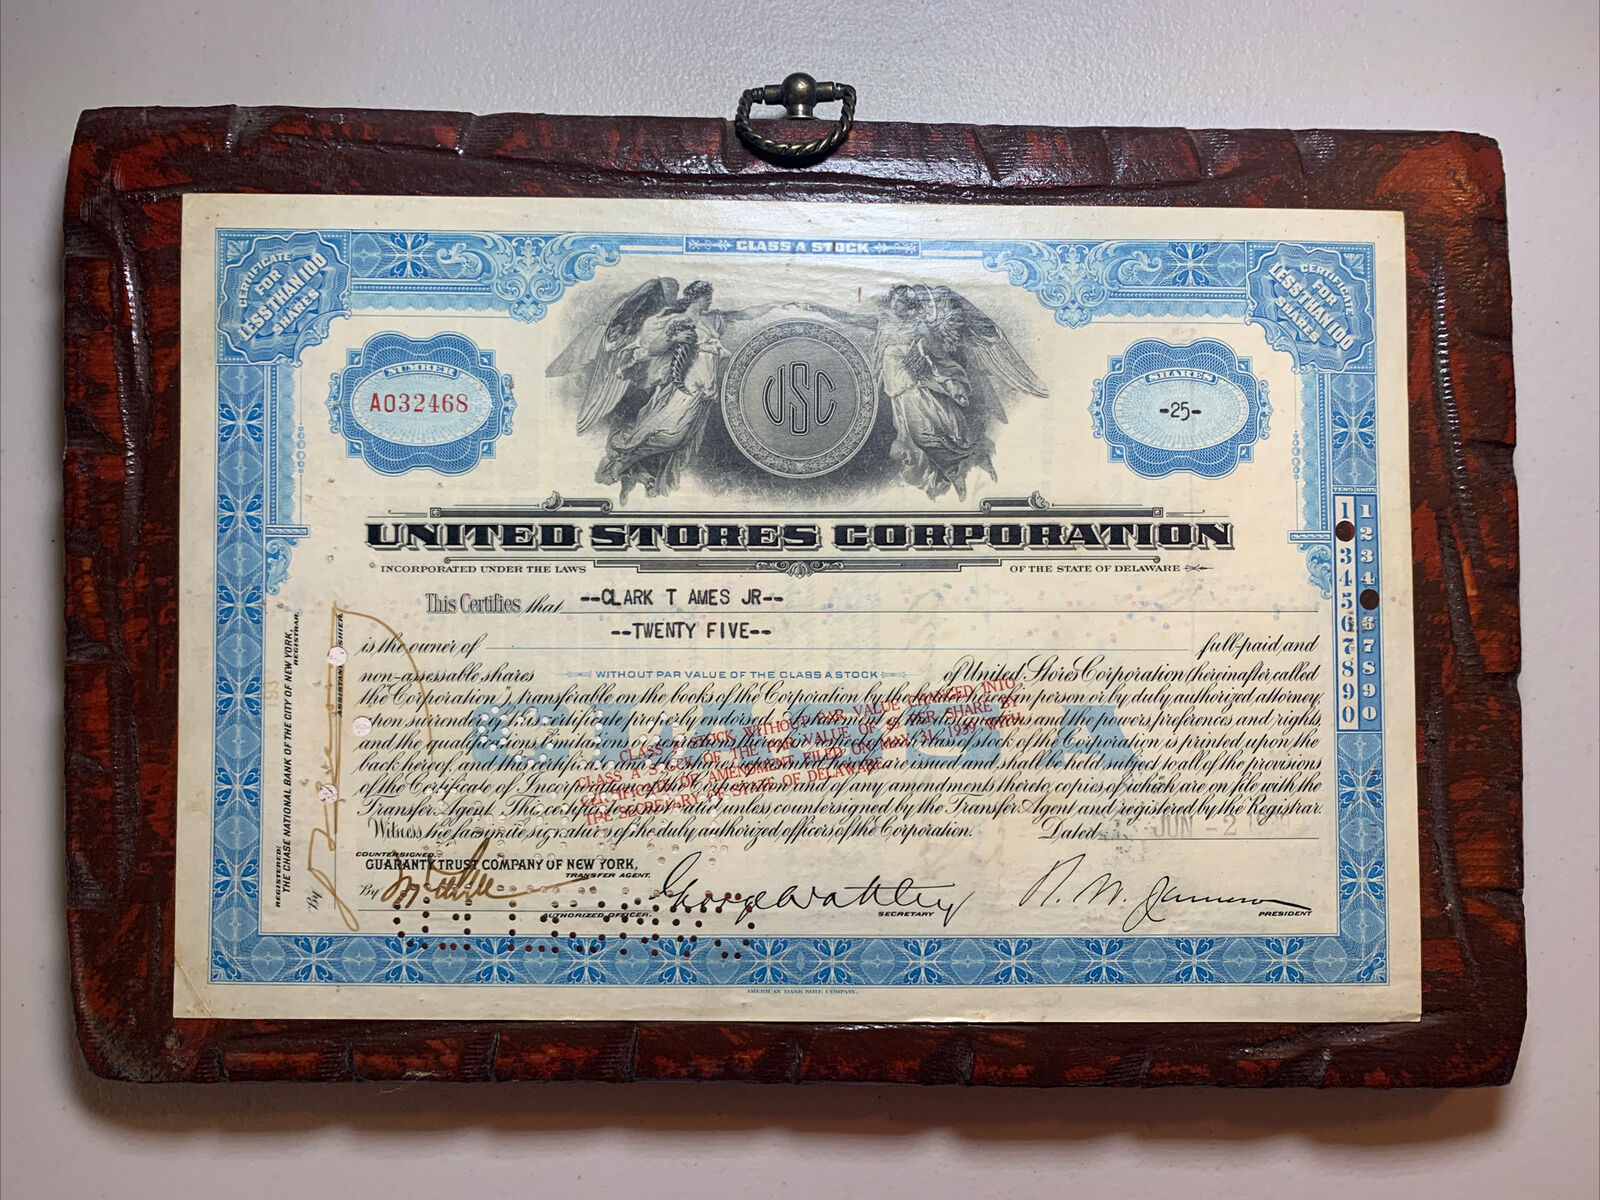 United Stores Corporation - Class A Stock  Certificate - 1939 - 25 Shares